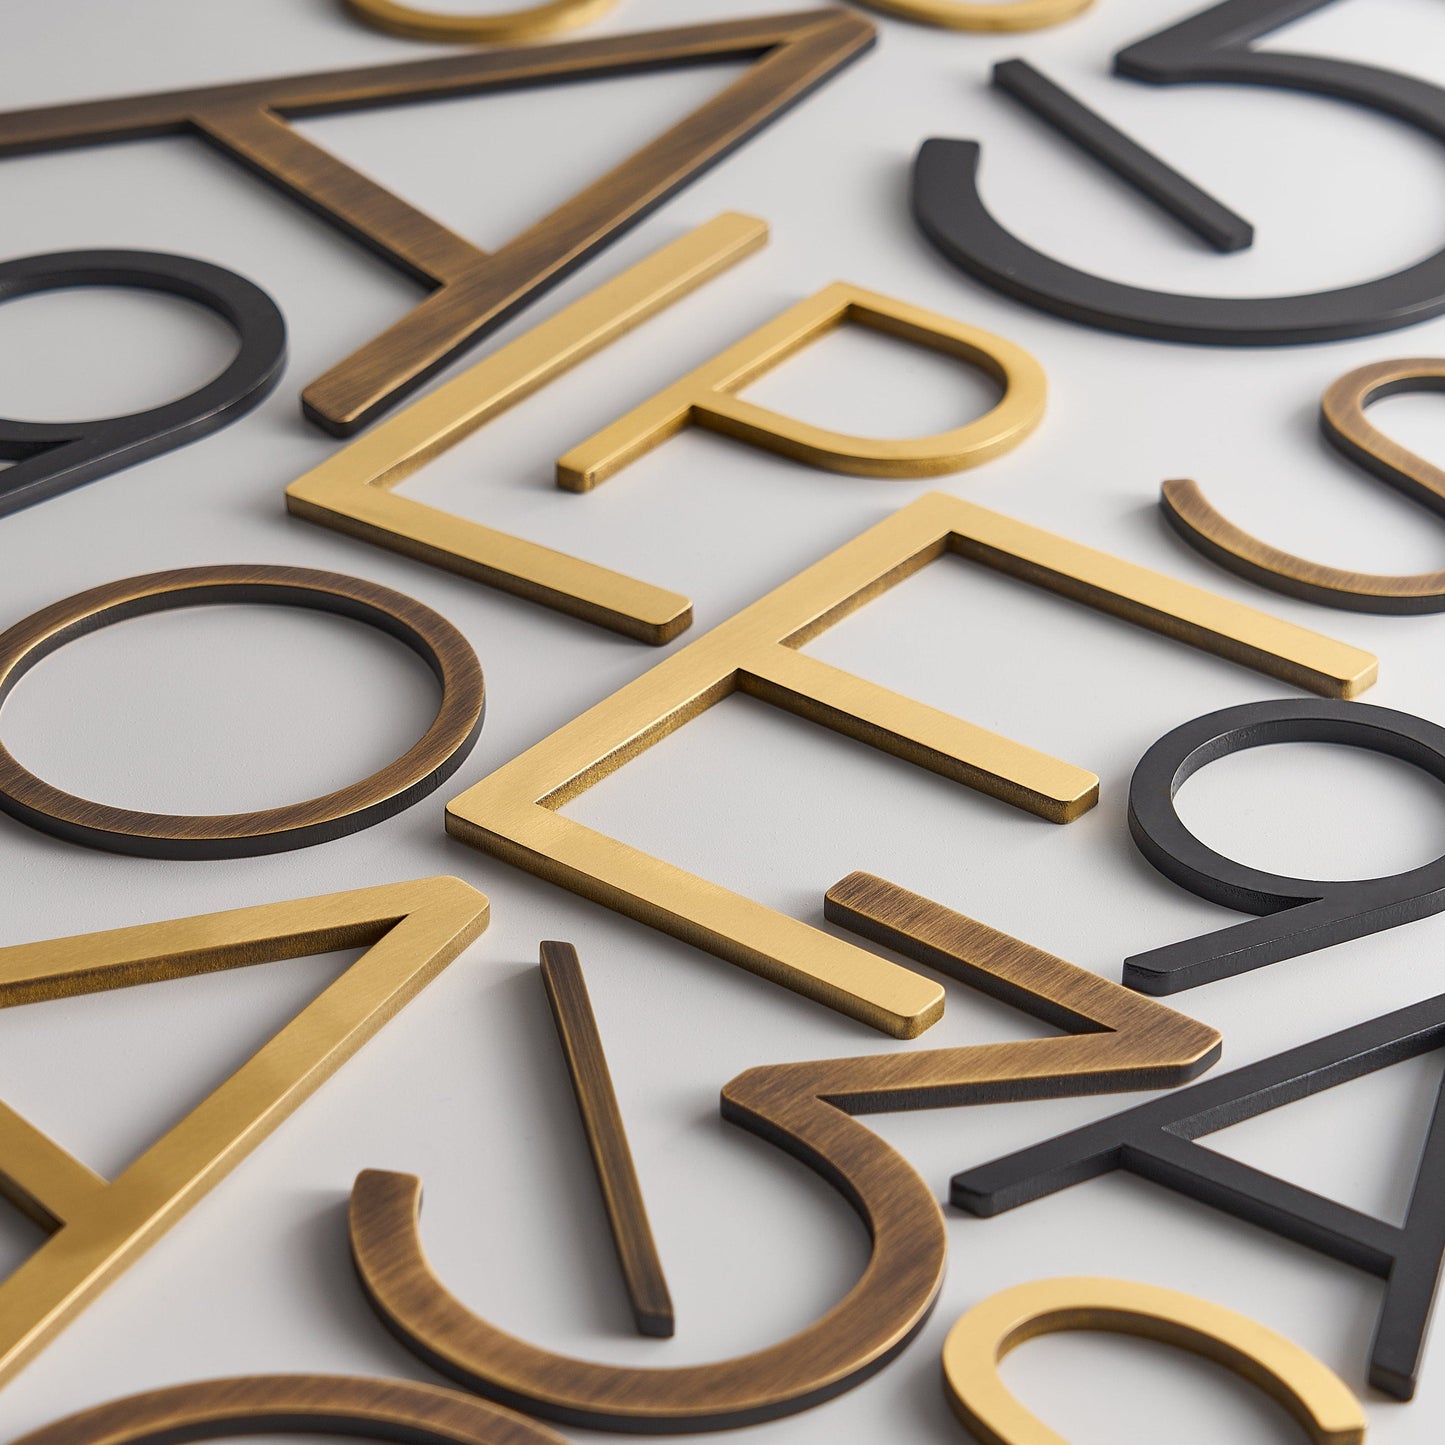 House Numbers and Letters Bayside Luxe Signage - Solid Antique Brass House Numbers and Letters - Watson's Bay 10cm